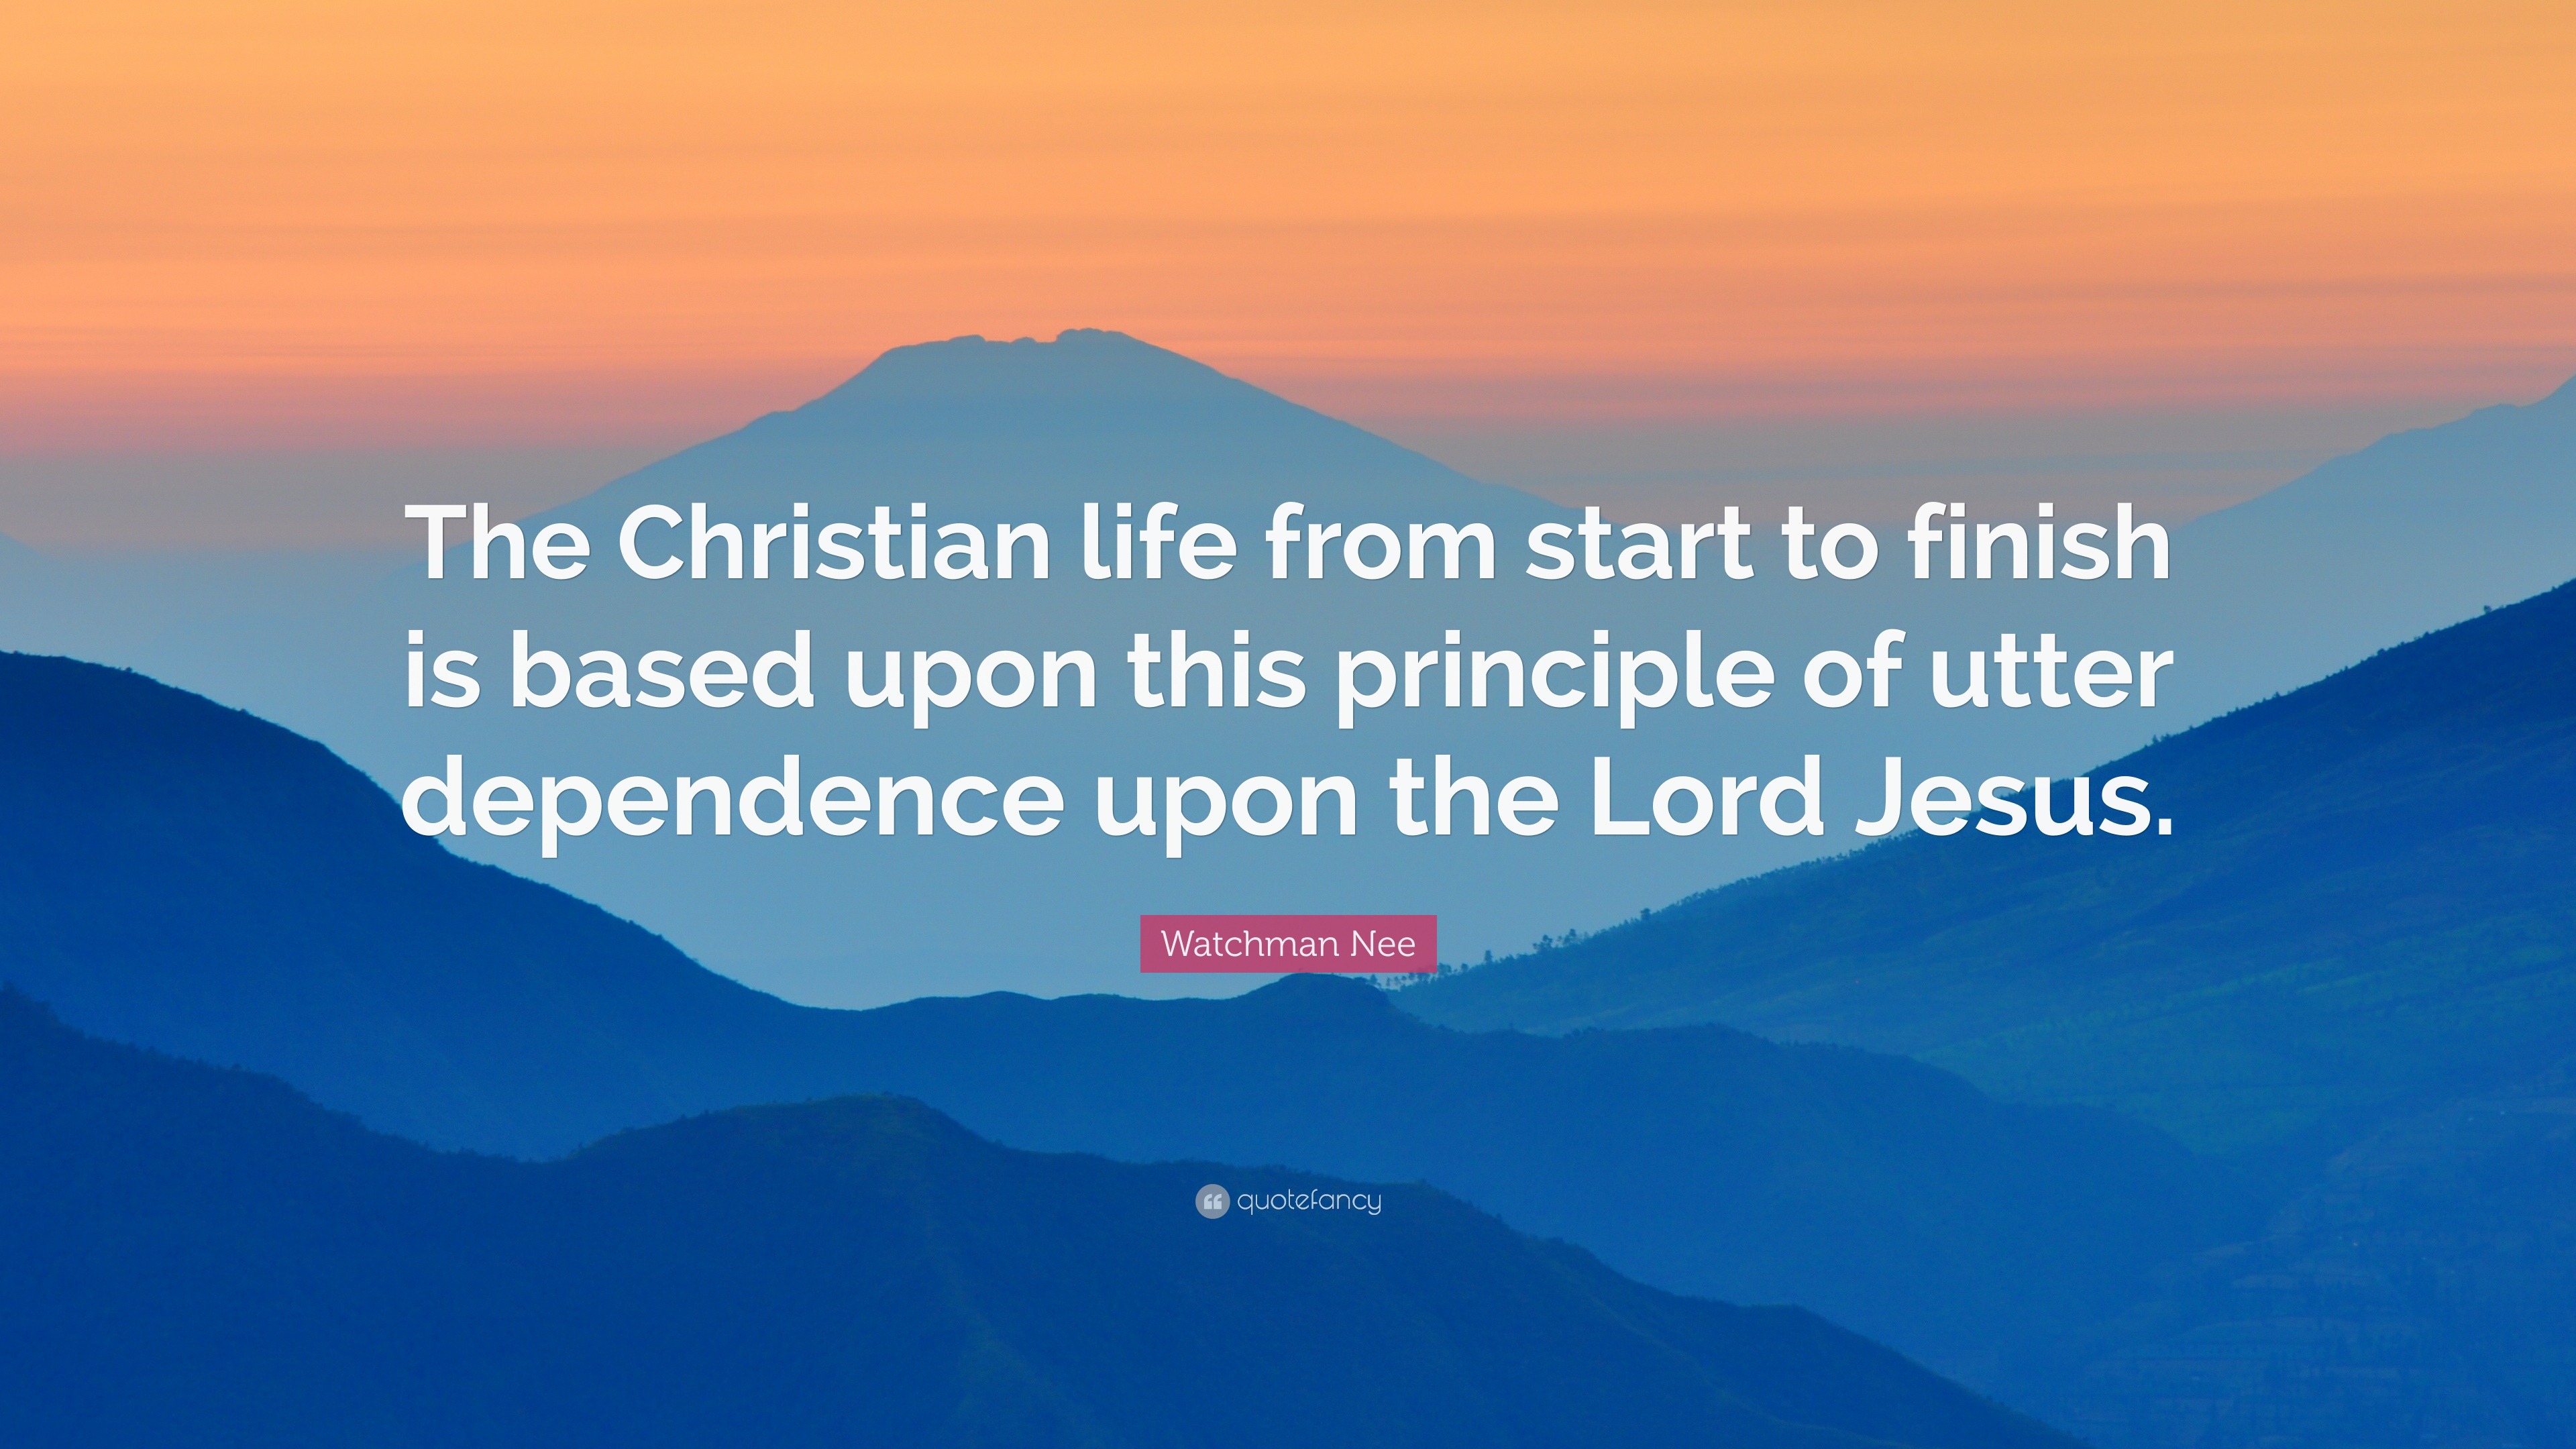 Watchman Nee Quote: “The Christian life from start to finish is based ...